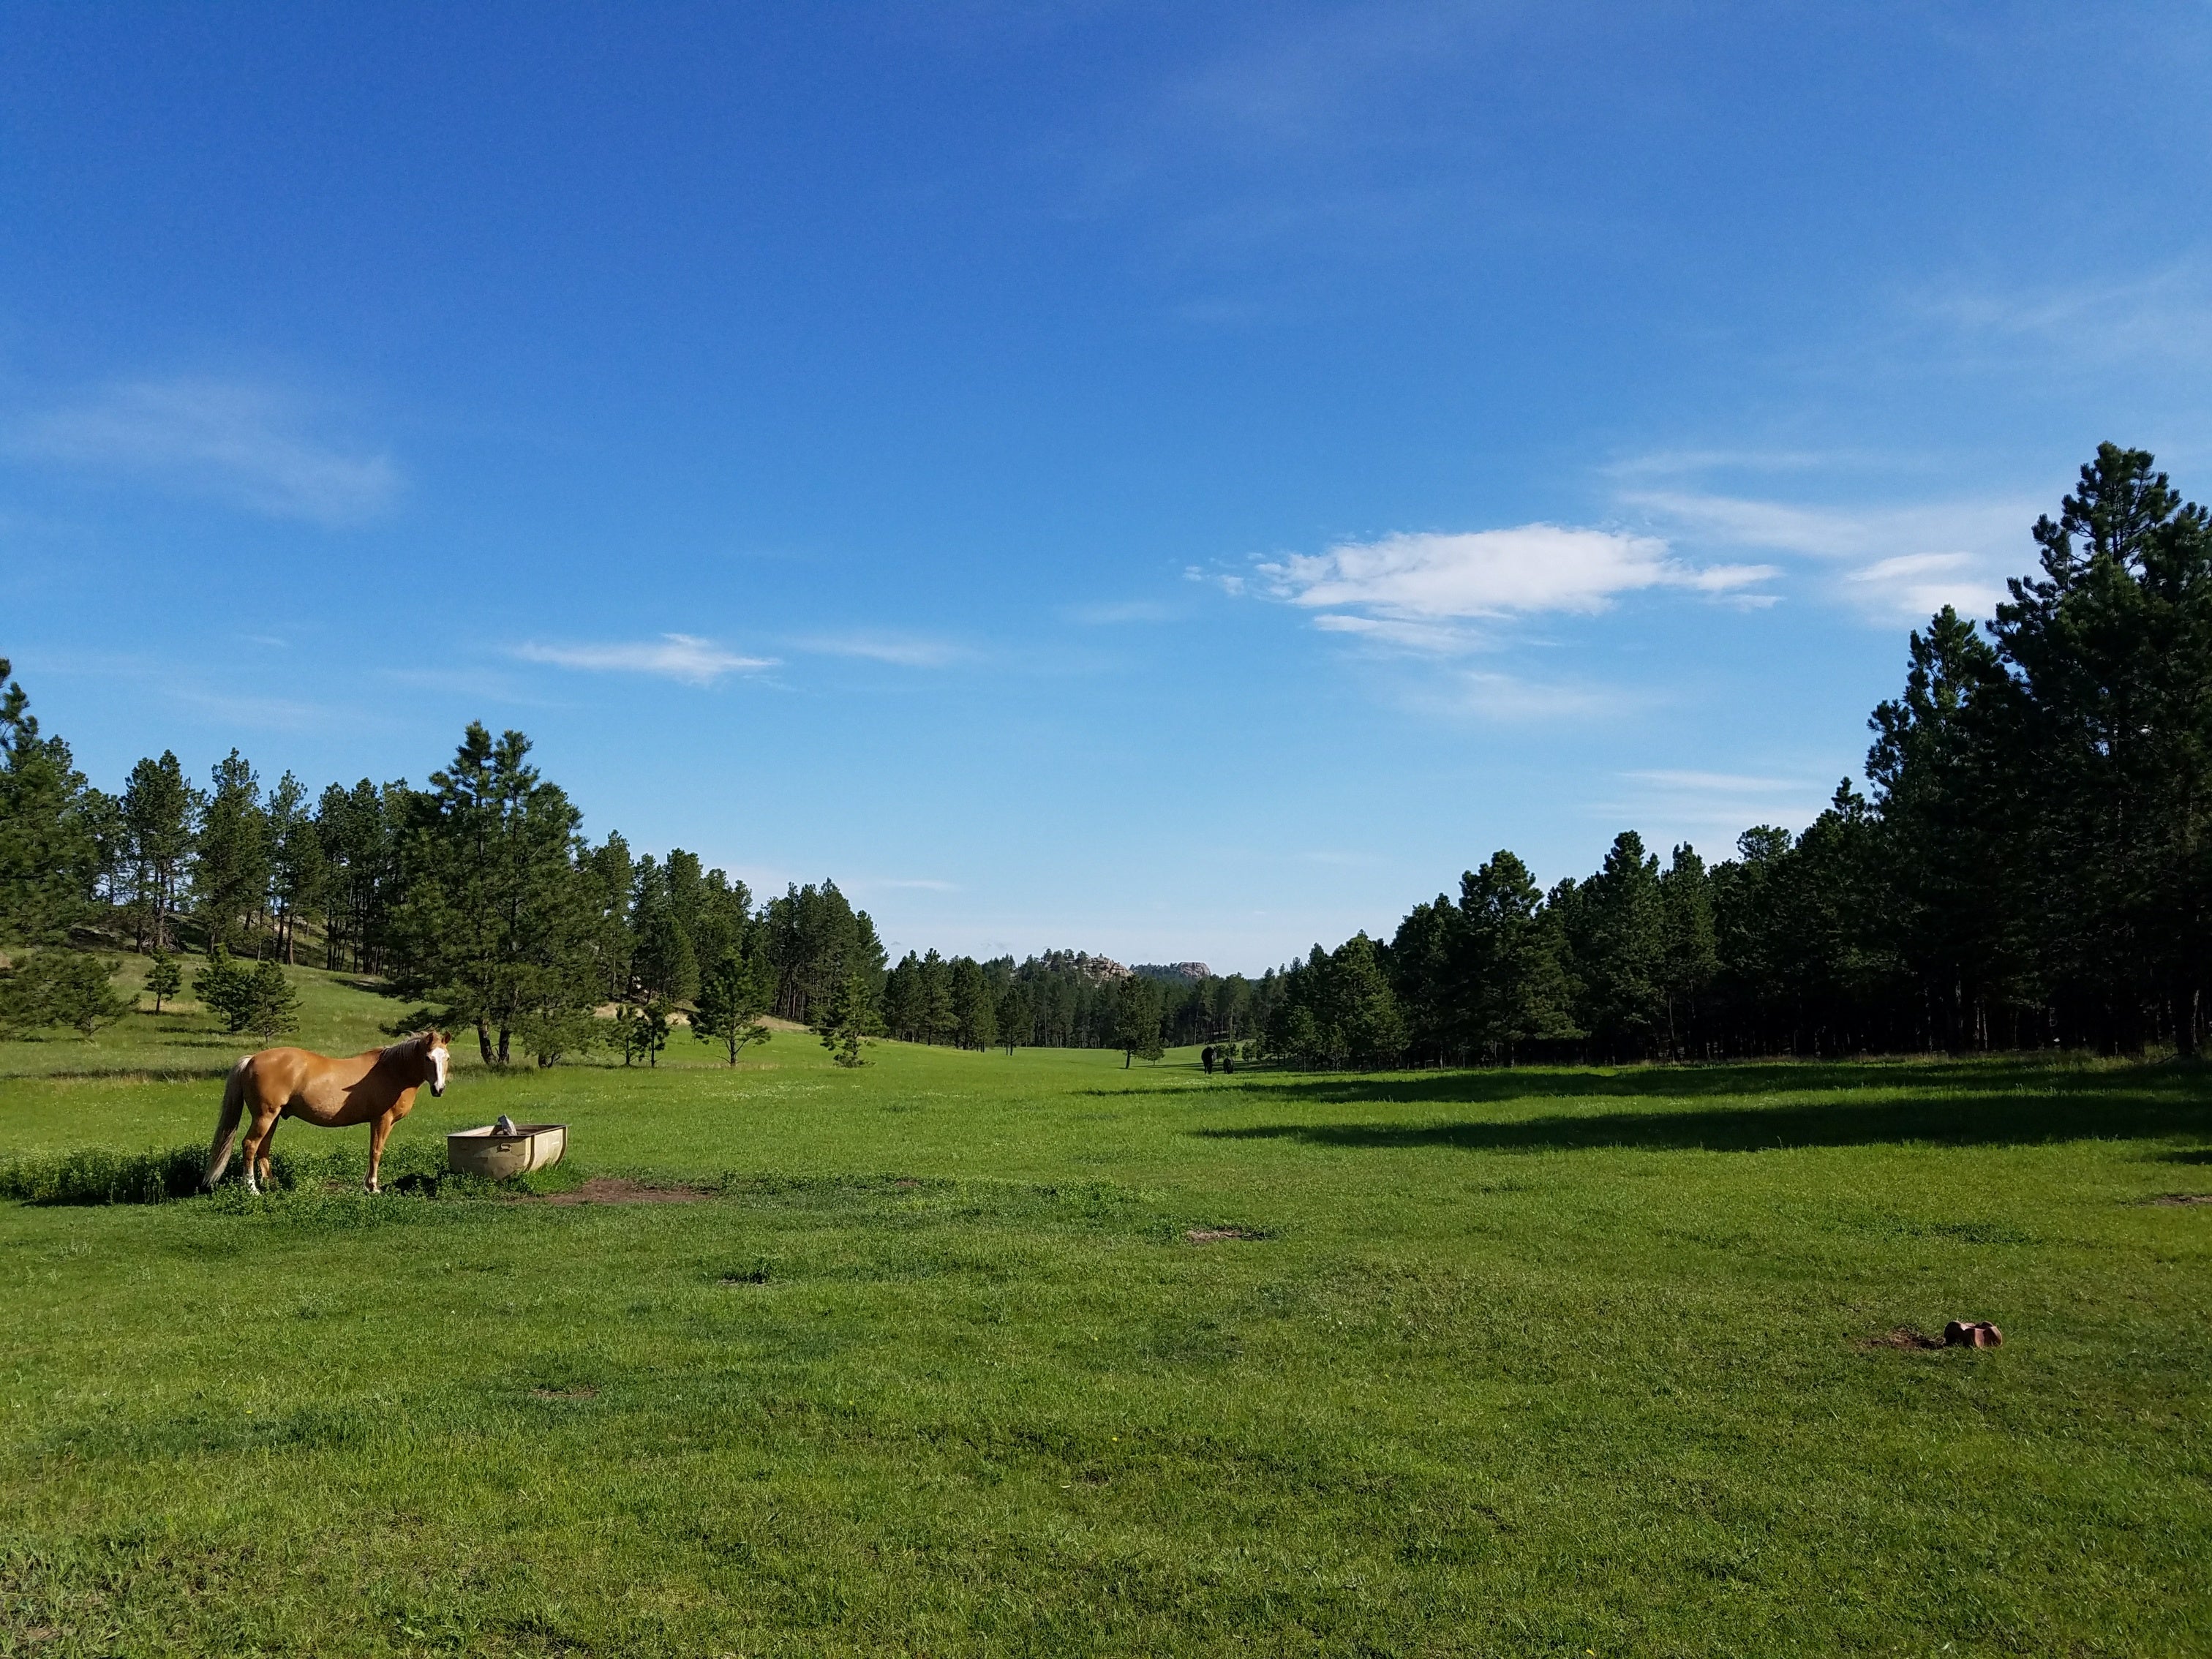 The pasture, now also the Glamping site